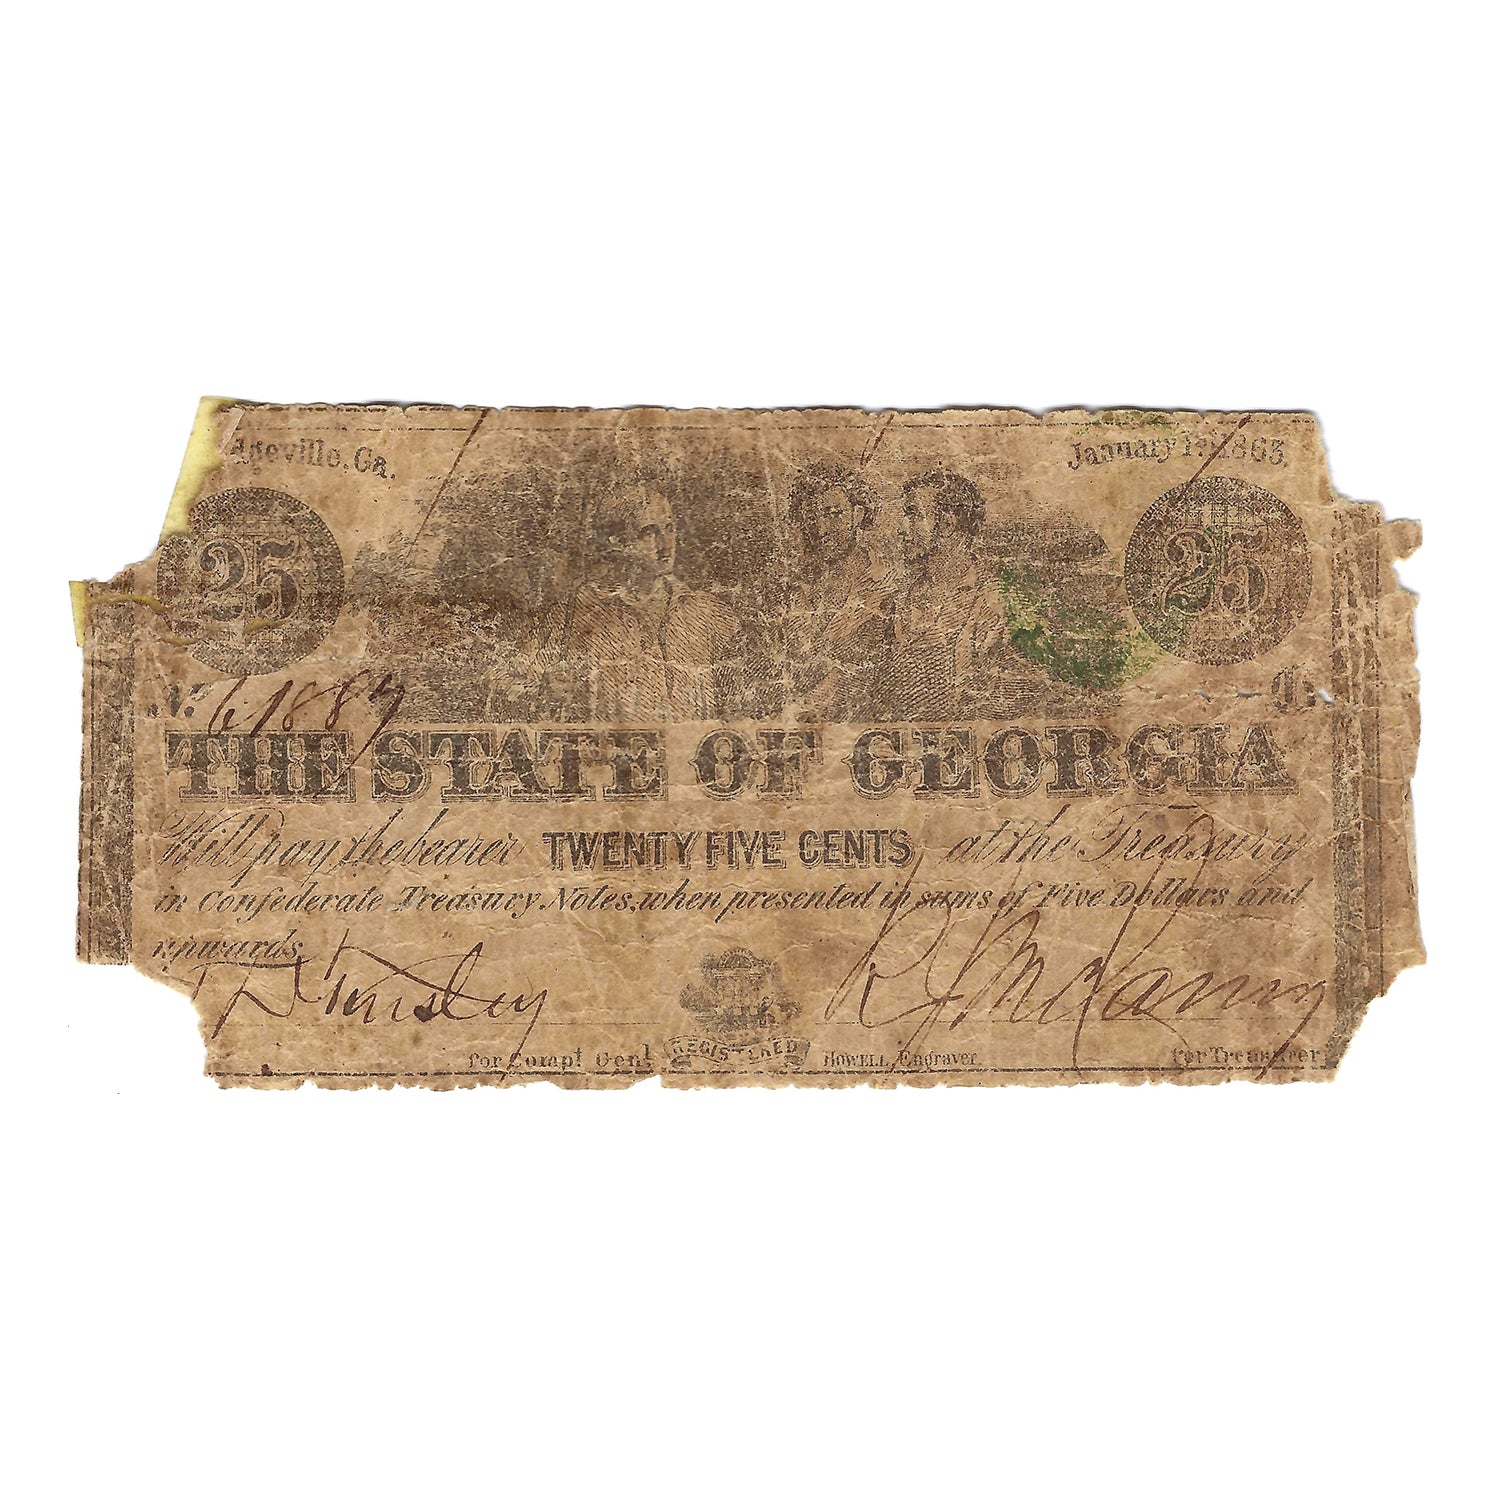 1863 25 Cent Obsolete Bank Note, State of Georgia, Circulated Condition